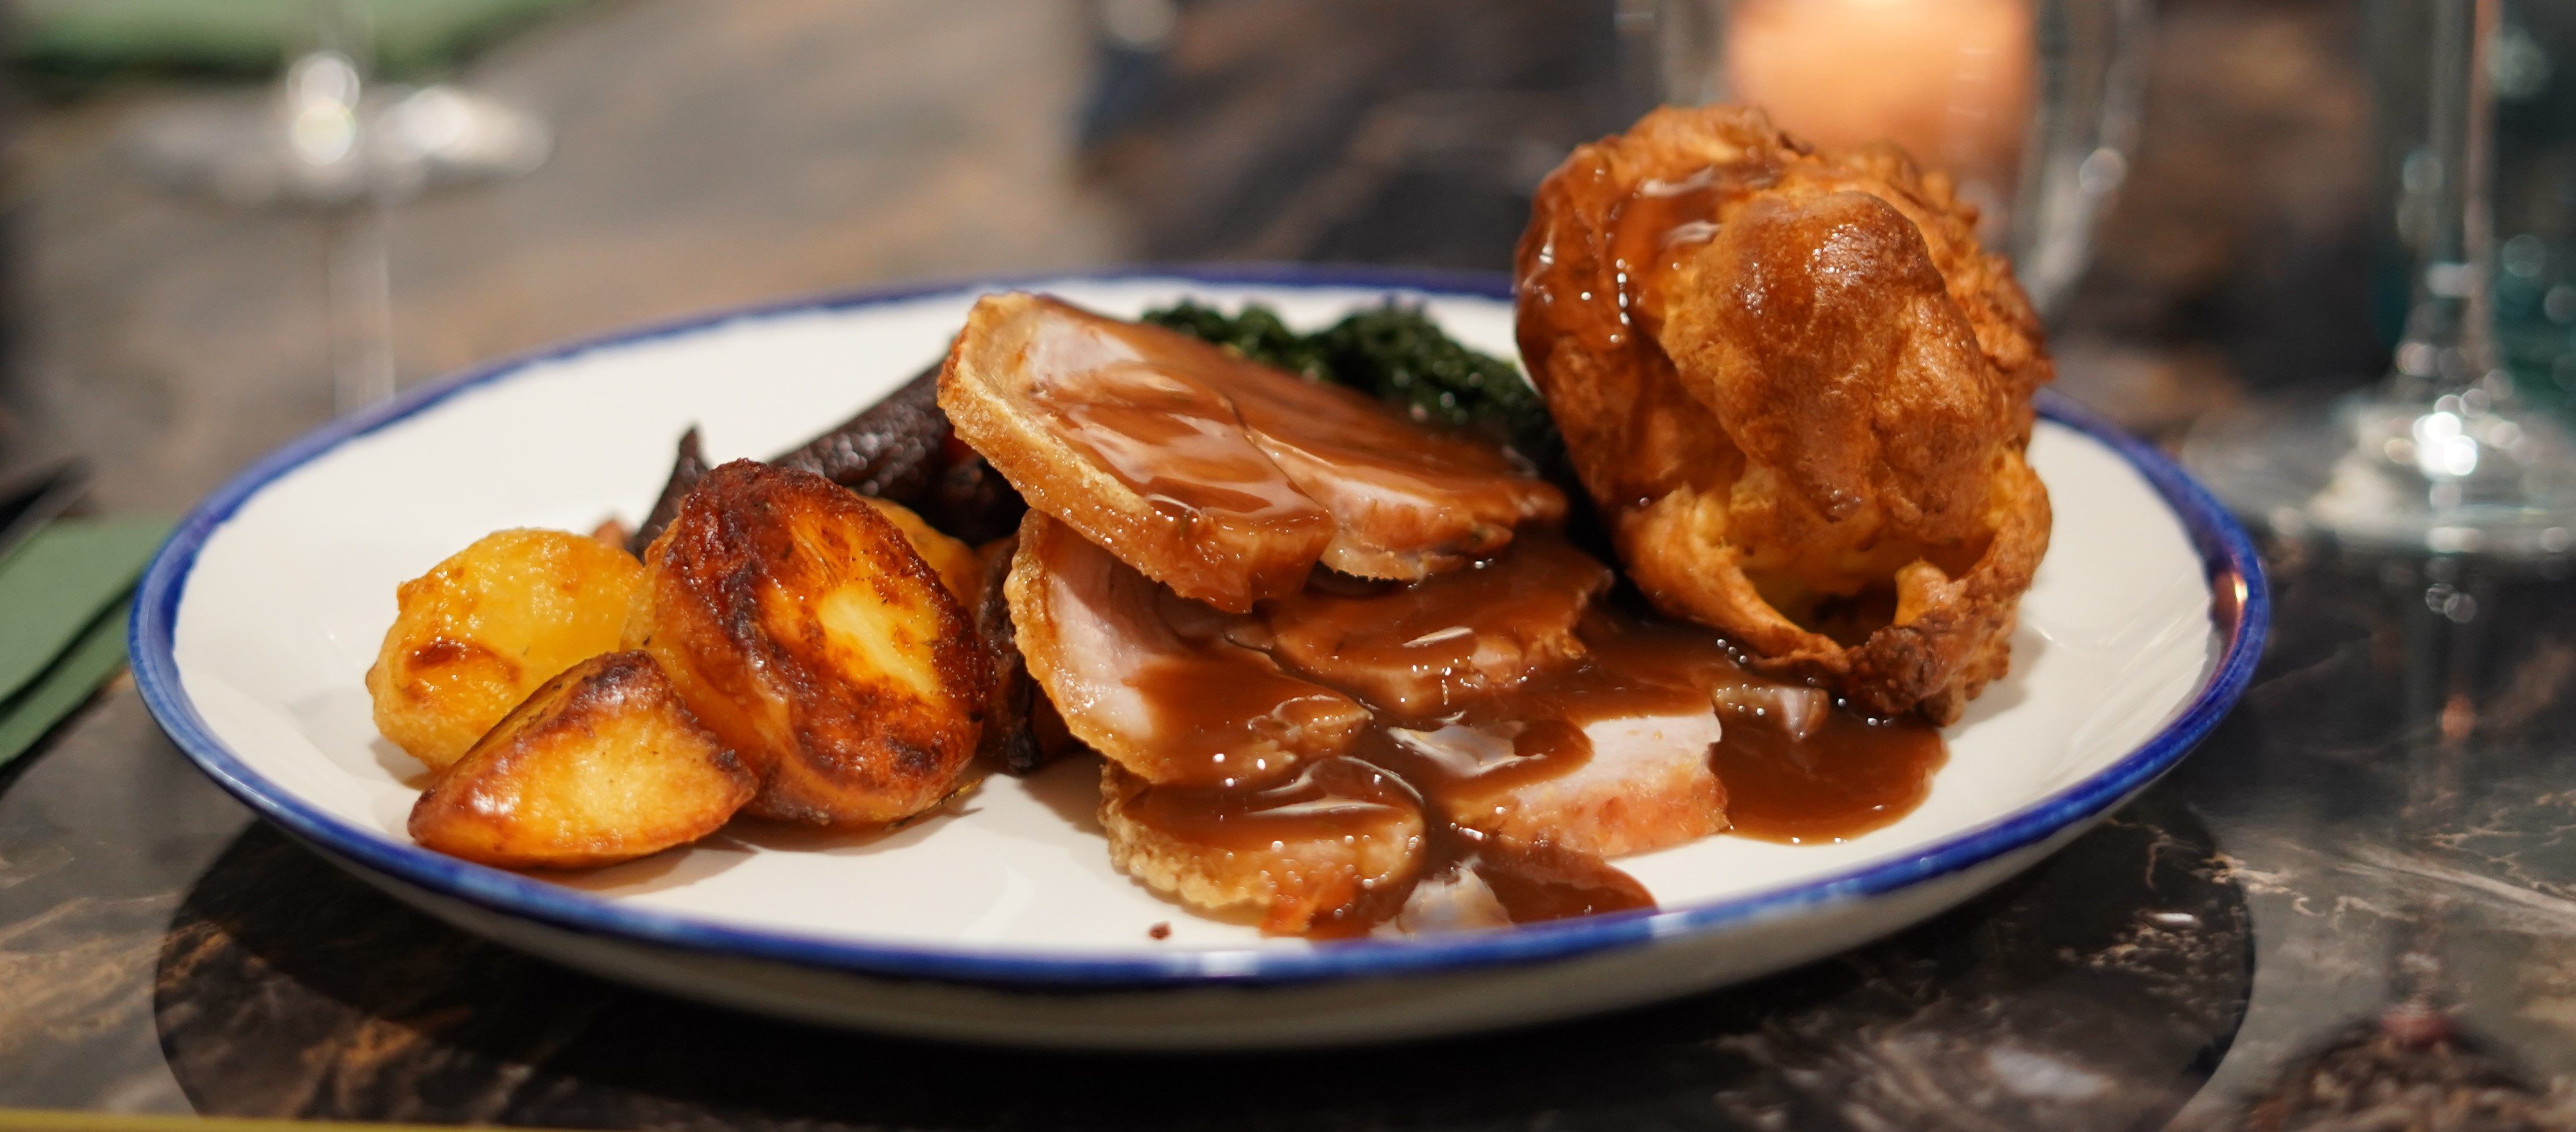 Close up of a roast dinner with gravy and a wine glass out of focus in the background.